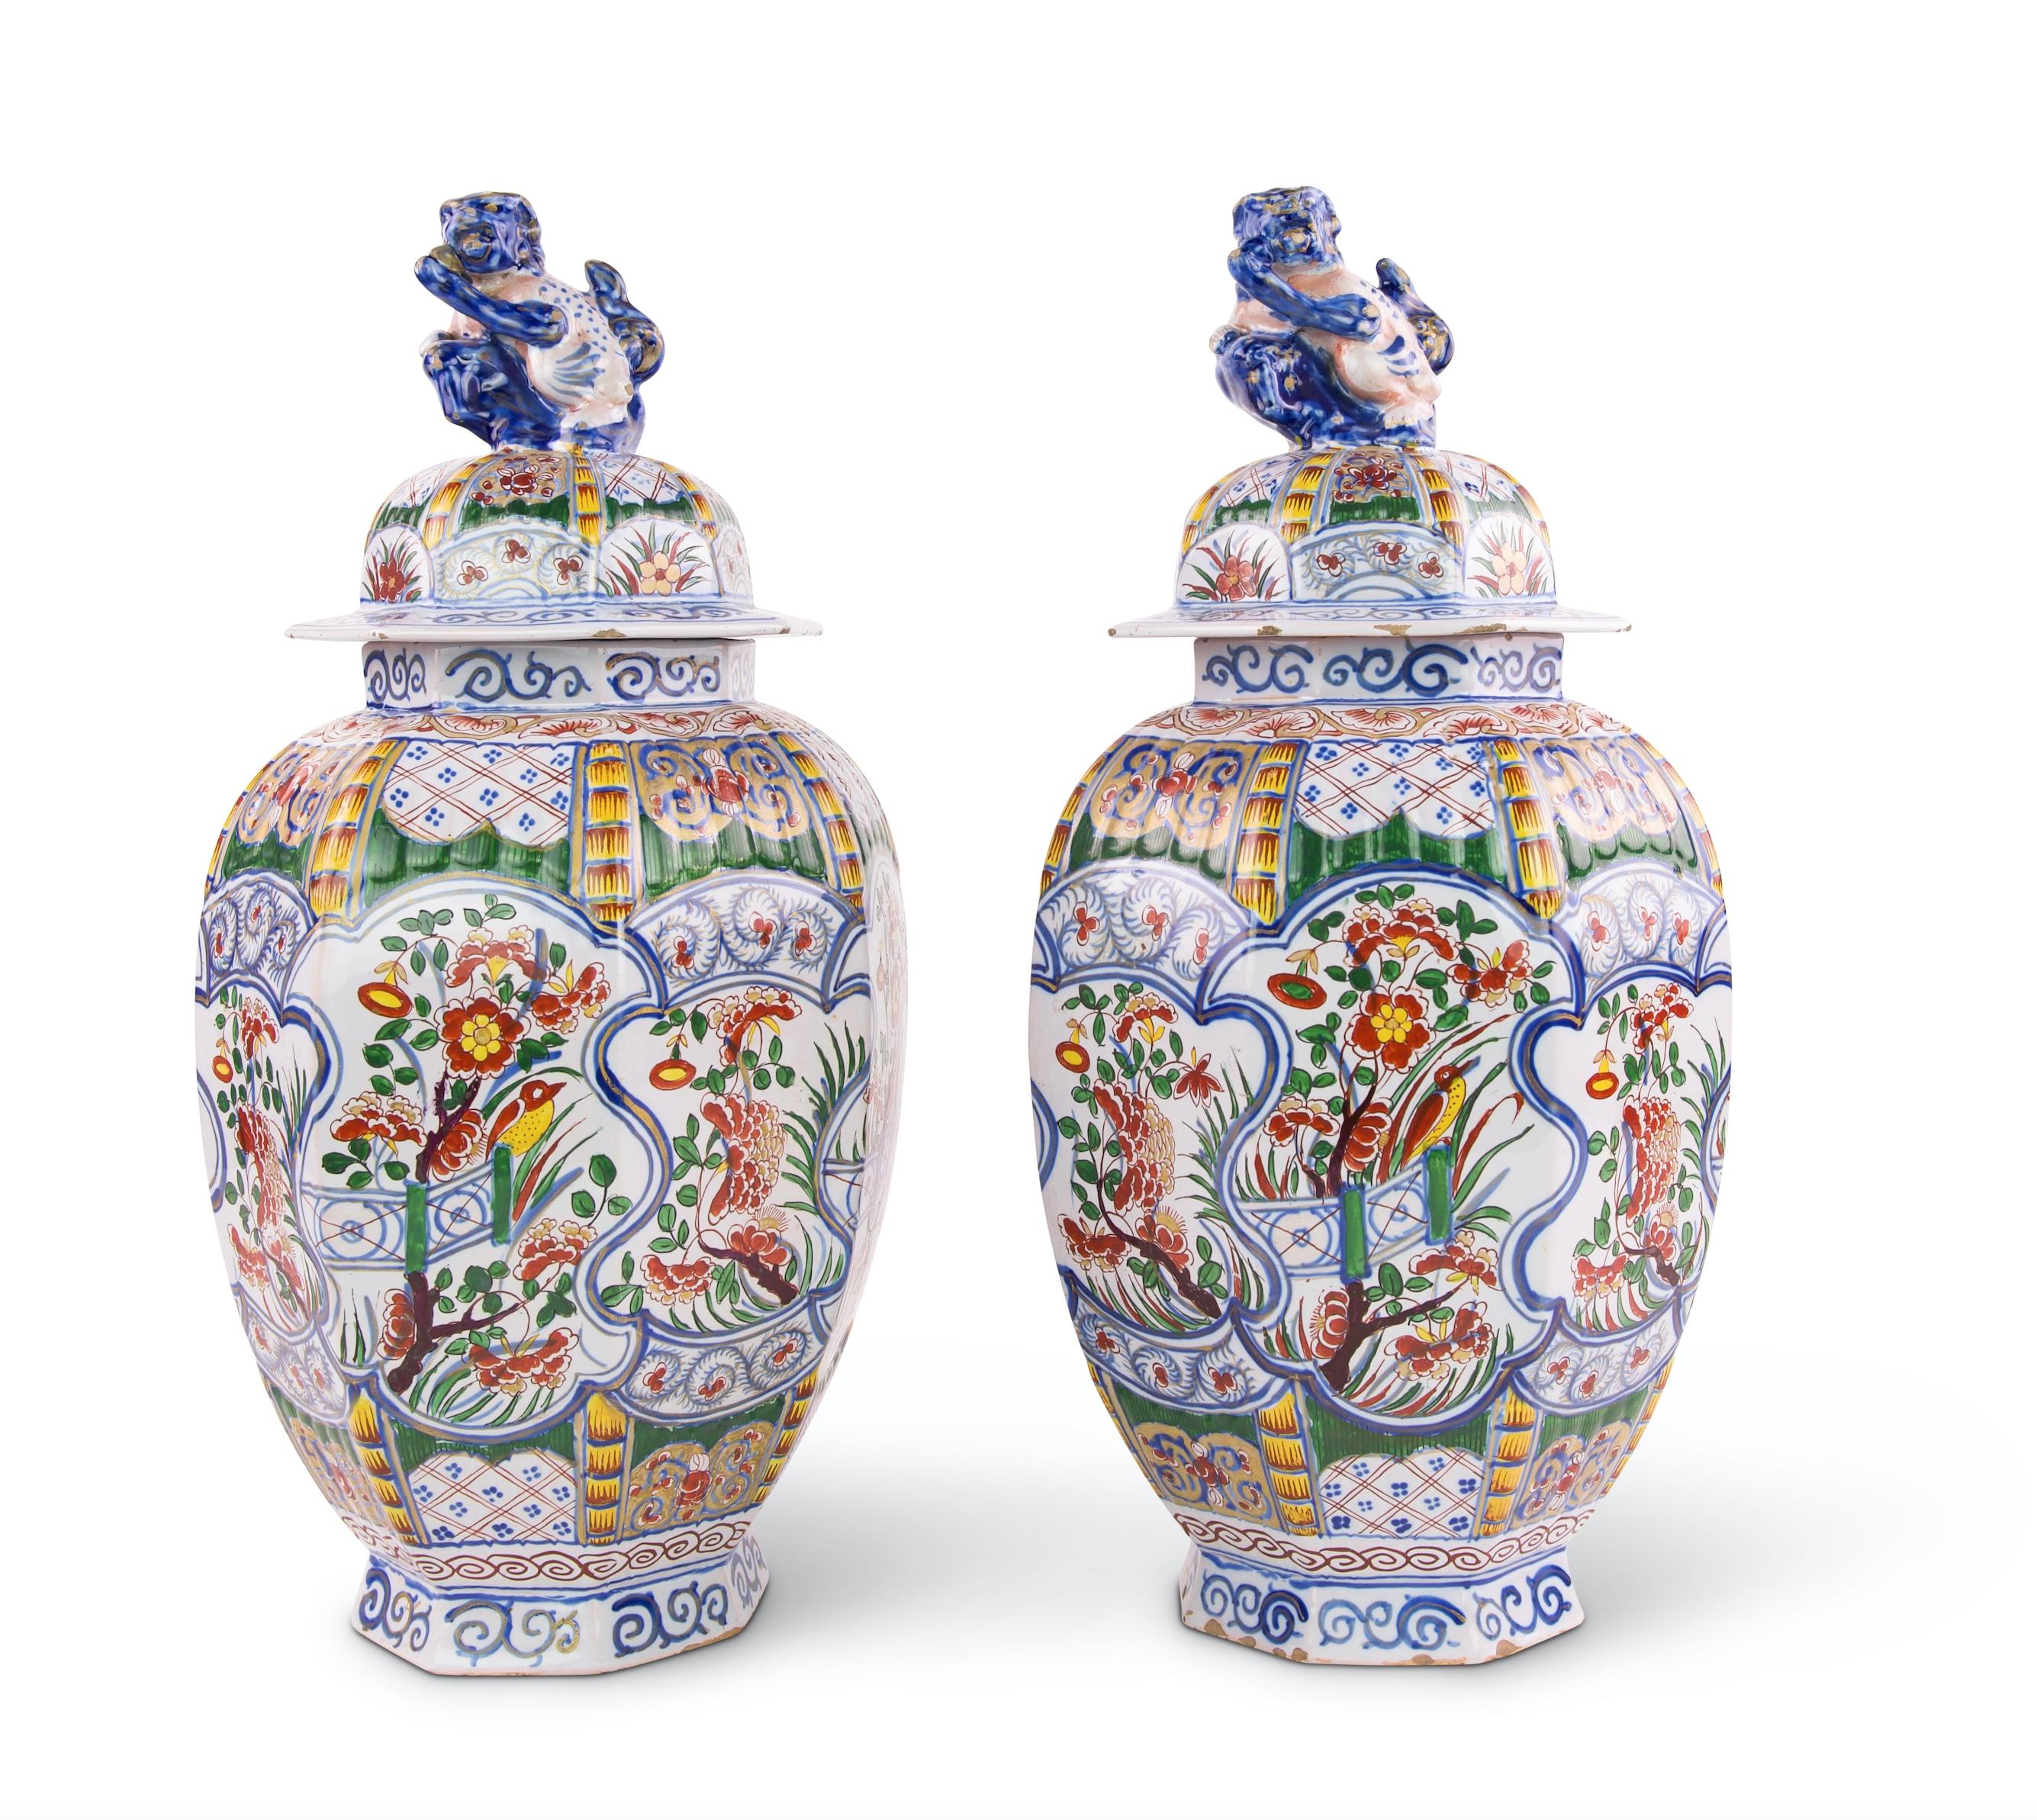 A fine pair of Dutch Delft octagonal polychrome vases and covers, with ribbed bodies and painted panels of flowers and foliage in the famille verte Kangxi style, the palette predominantly green and yellow with blues on a white background. The lids